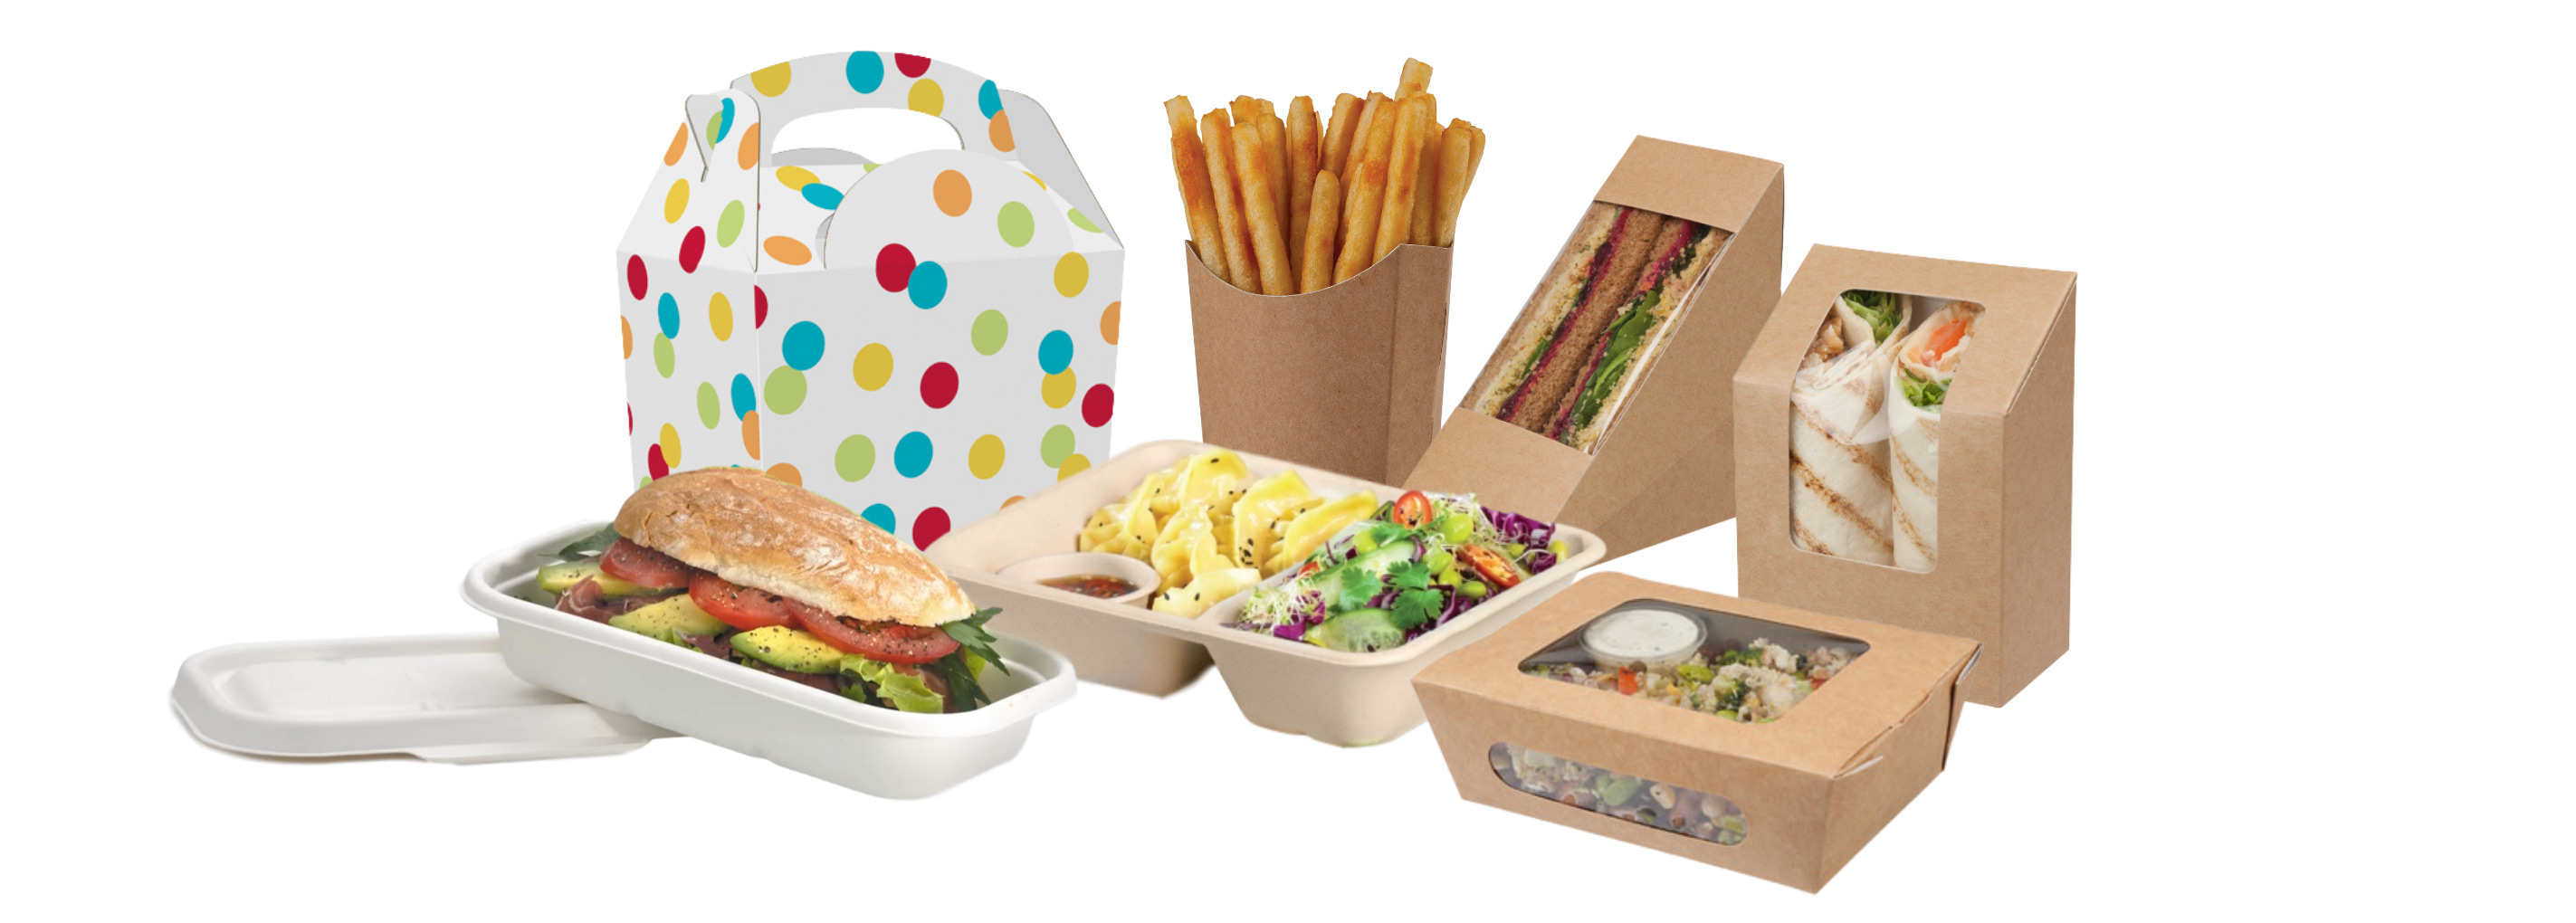 Compostable Products image